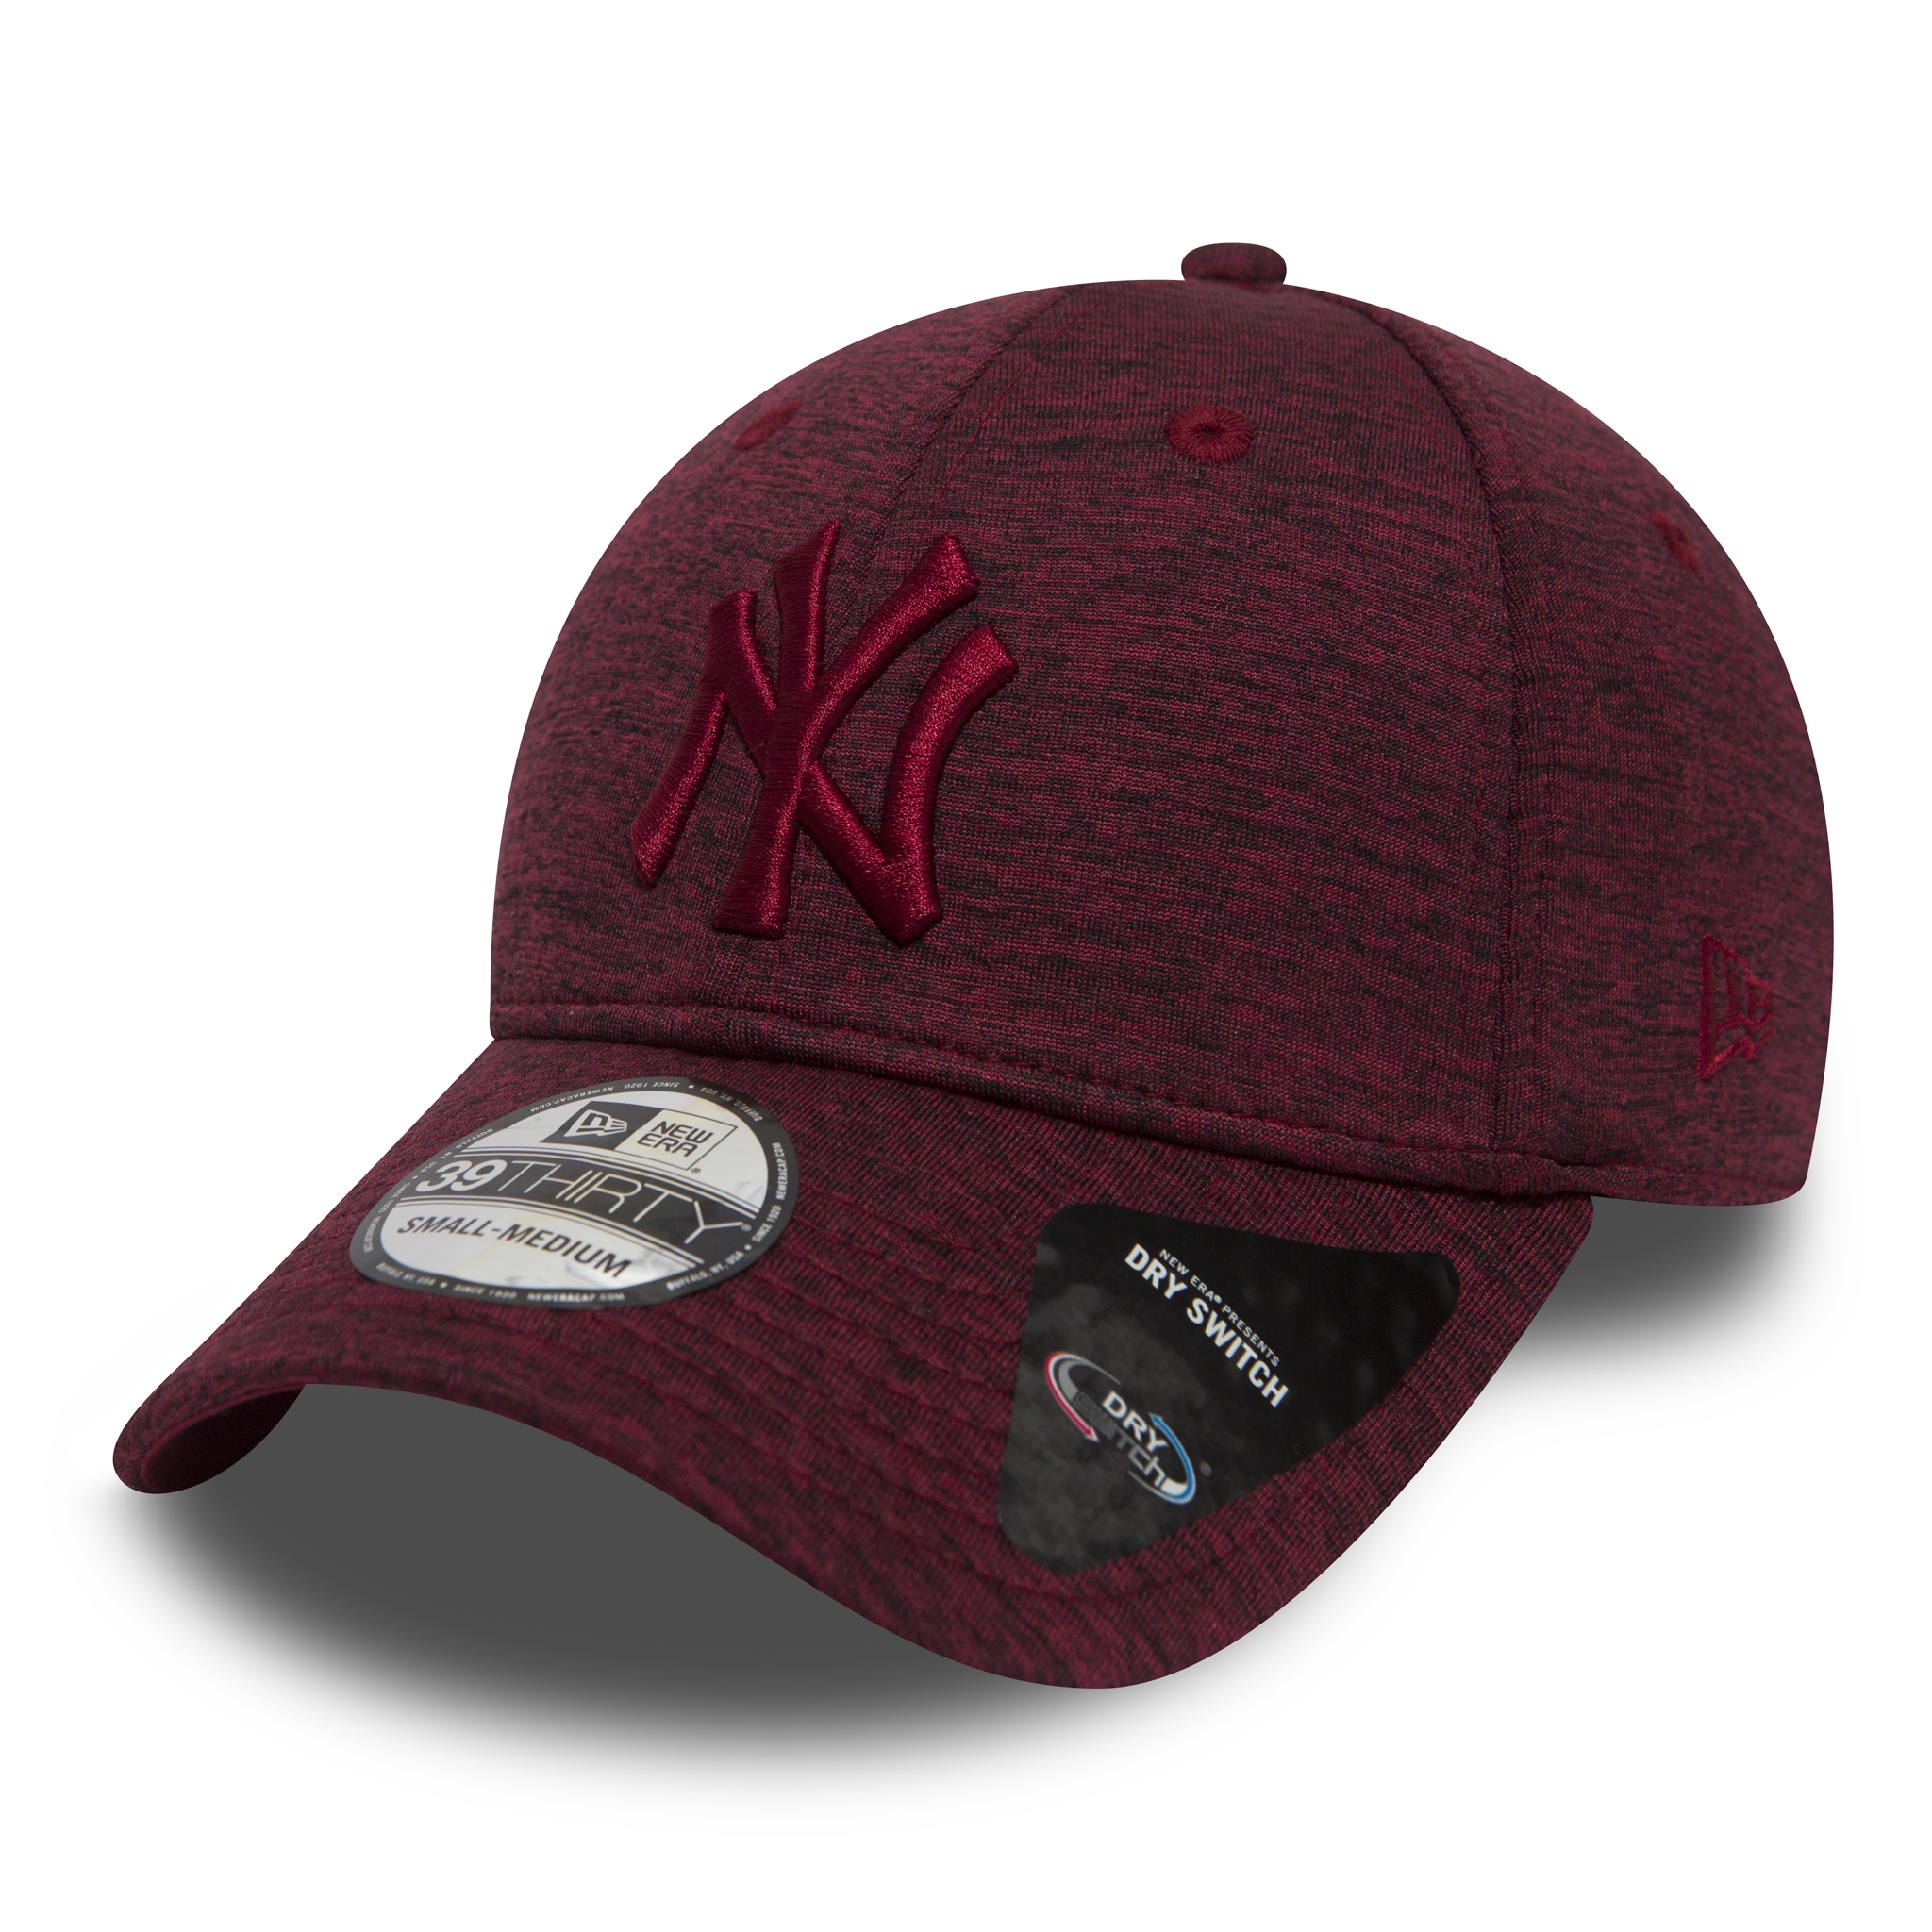 Cappellino 39THIRTY New York Yankees rosso cardinale